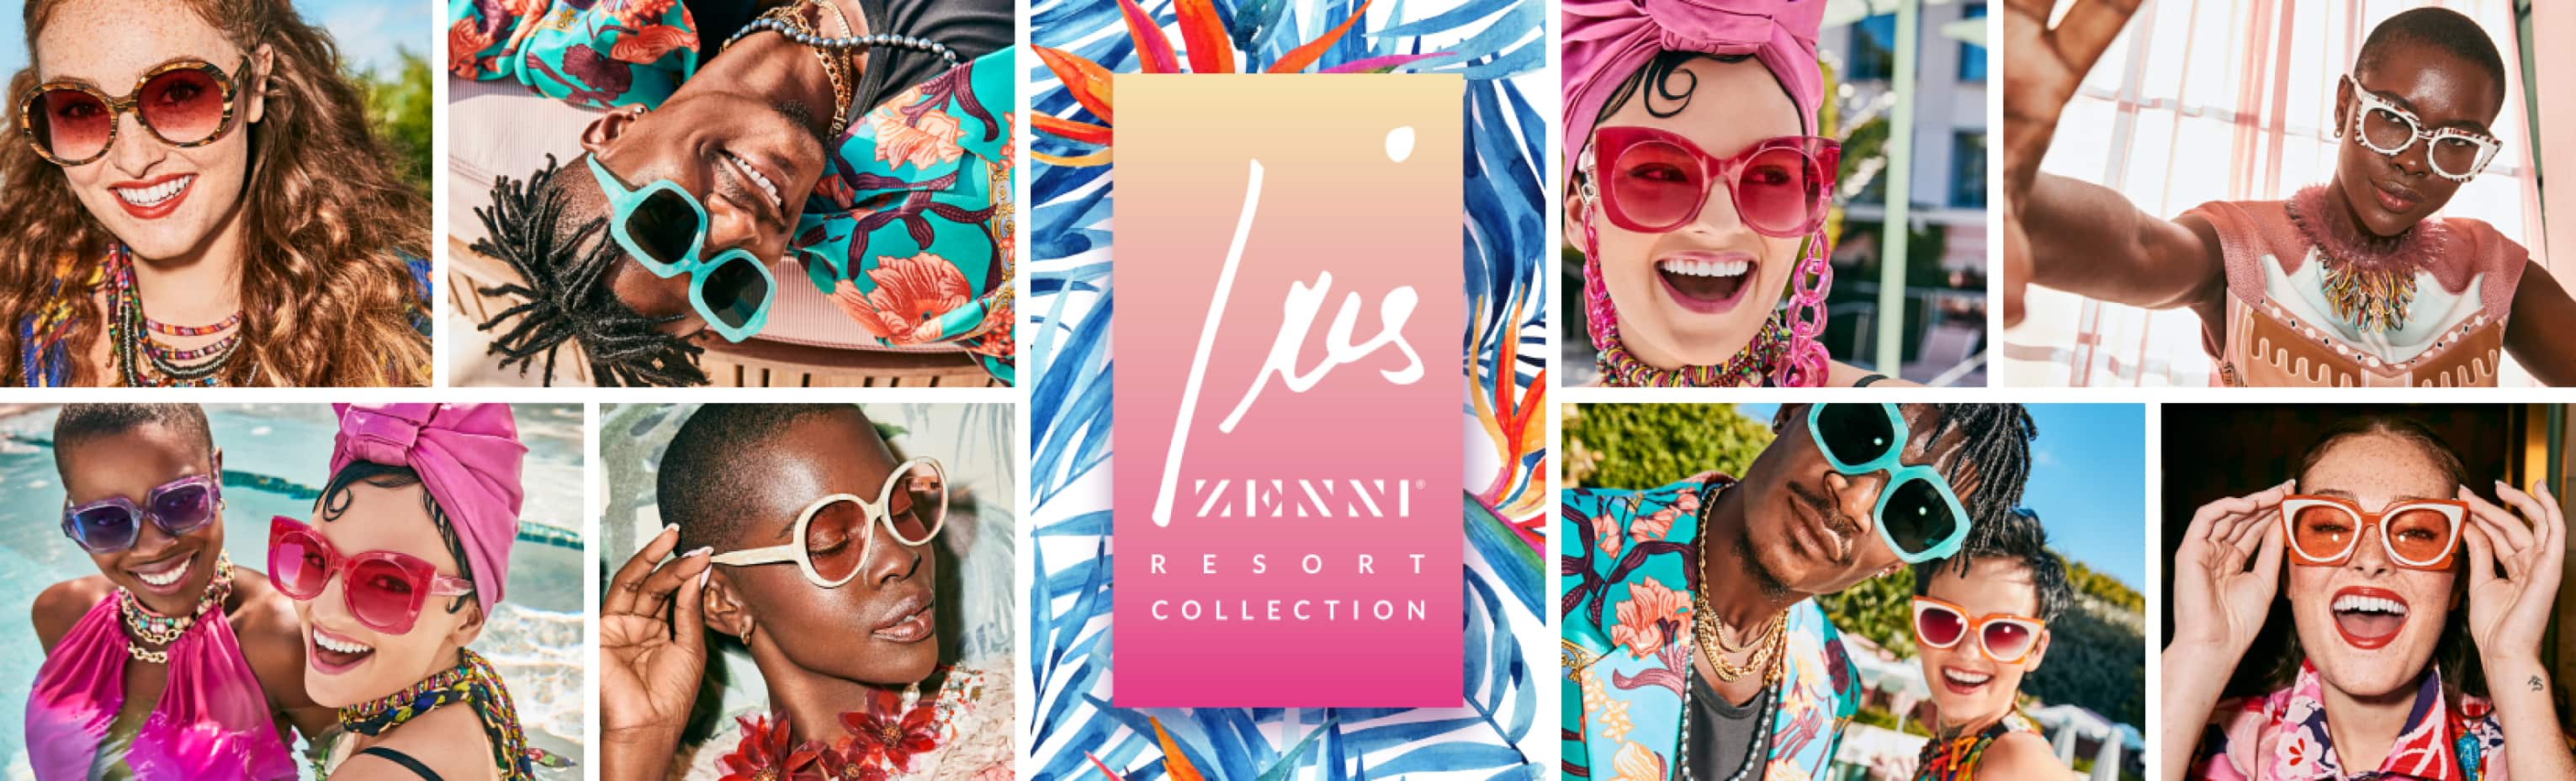 A collection of photographs depicting a wide variety of people wearing the Iris x Zenni Resort Collection.